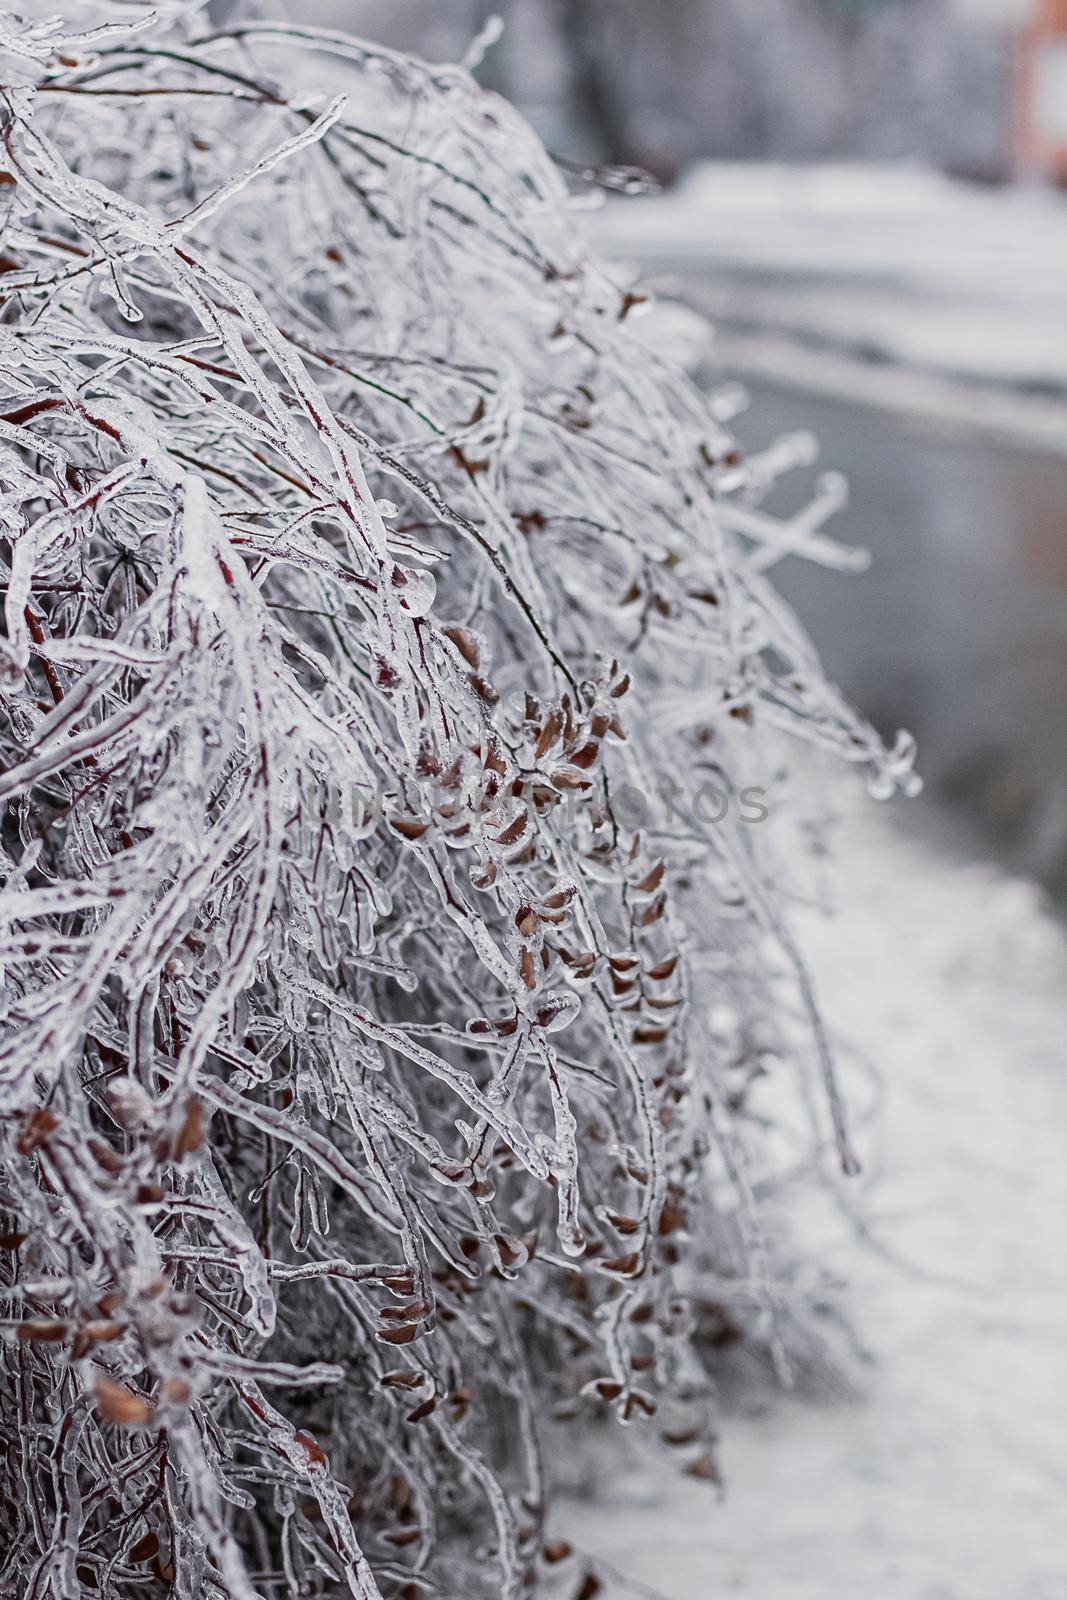 Ice covered tree branches from an ice storm. Icicles are forming from freezing rain